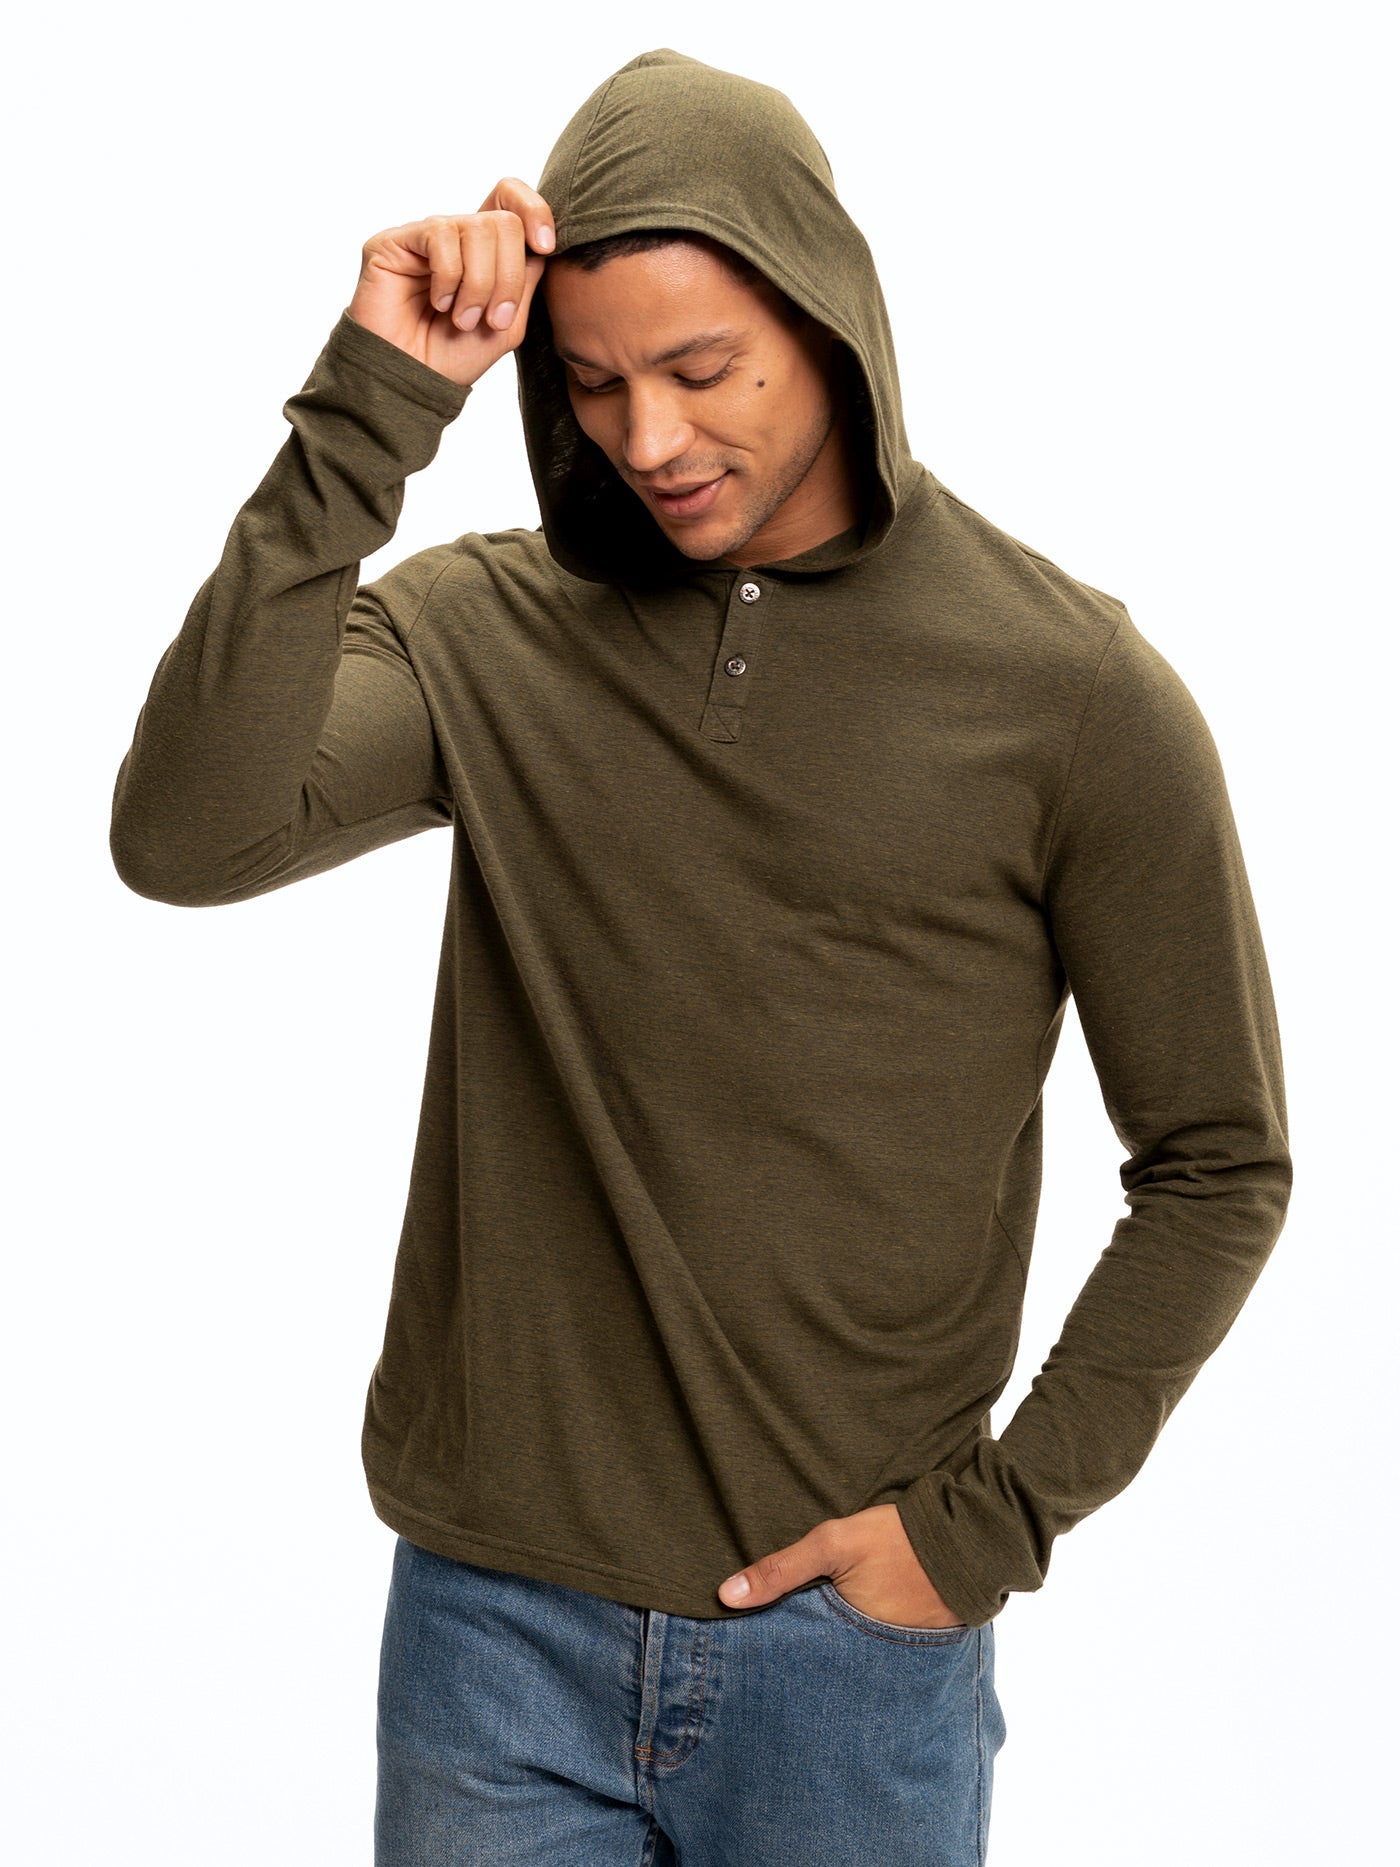 Long Sleeve Triblend 2-Button Henley Hoodie Mens Tops Tshirt Long Threads 4 Thought 